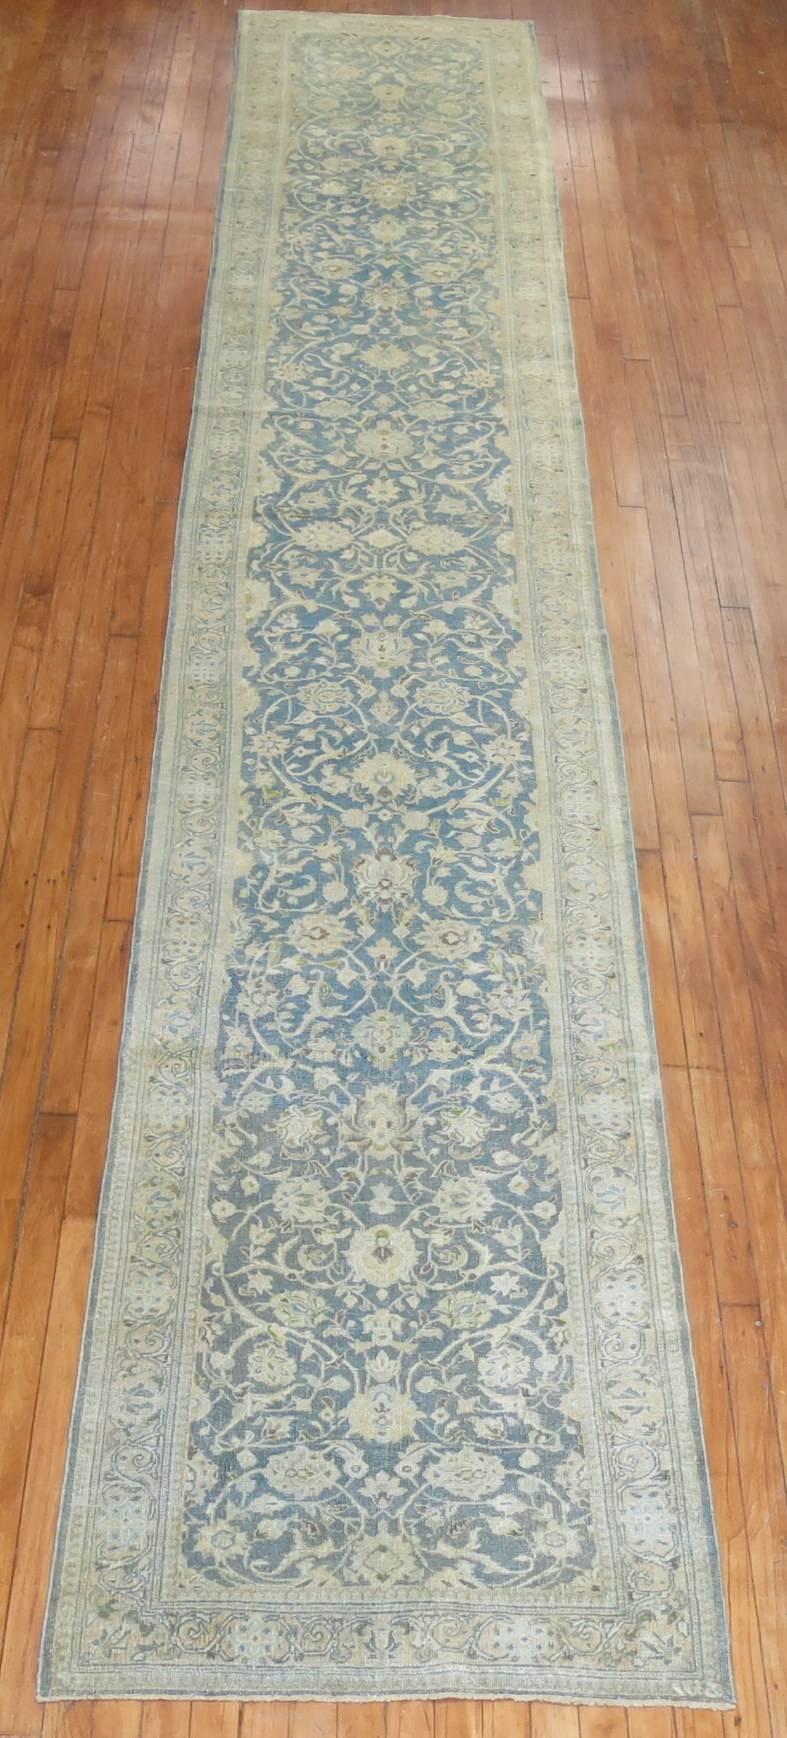 Mid-20th century Persian runner with a seafoam field and accents in mustard and sand.

Measures: 2'8'' x 17'7''.